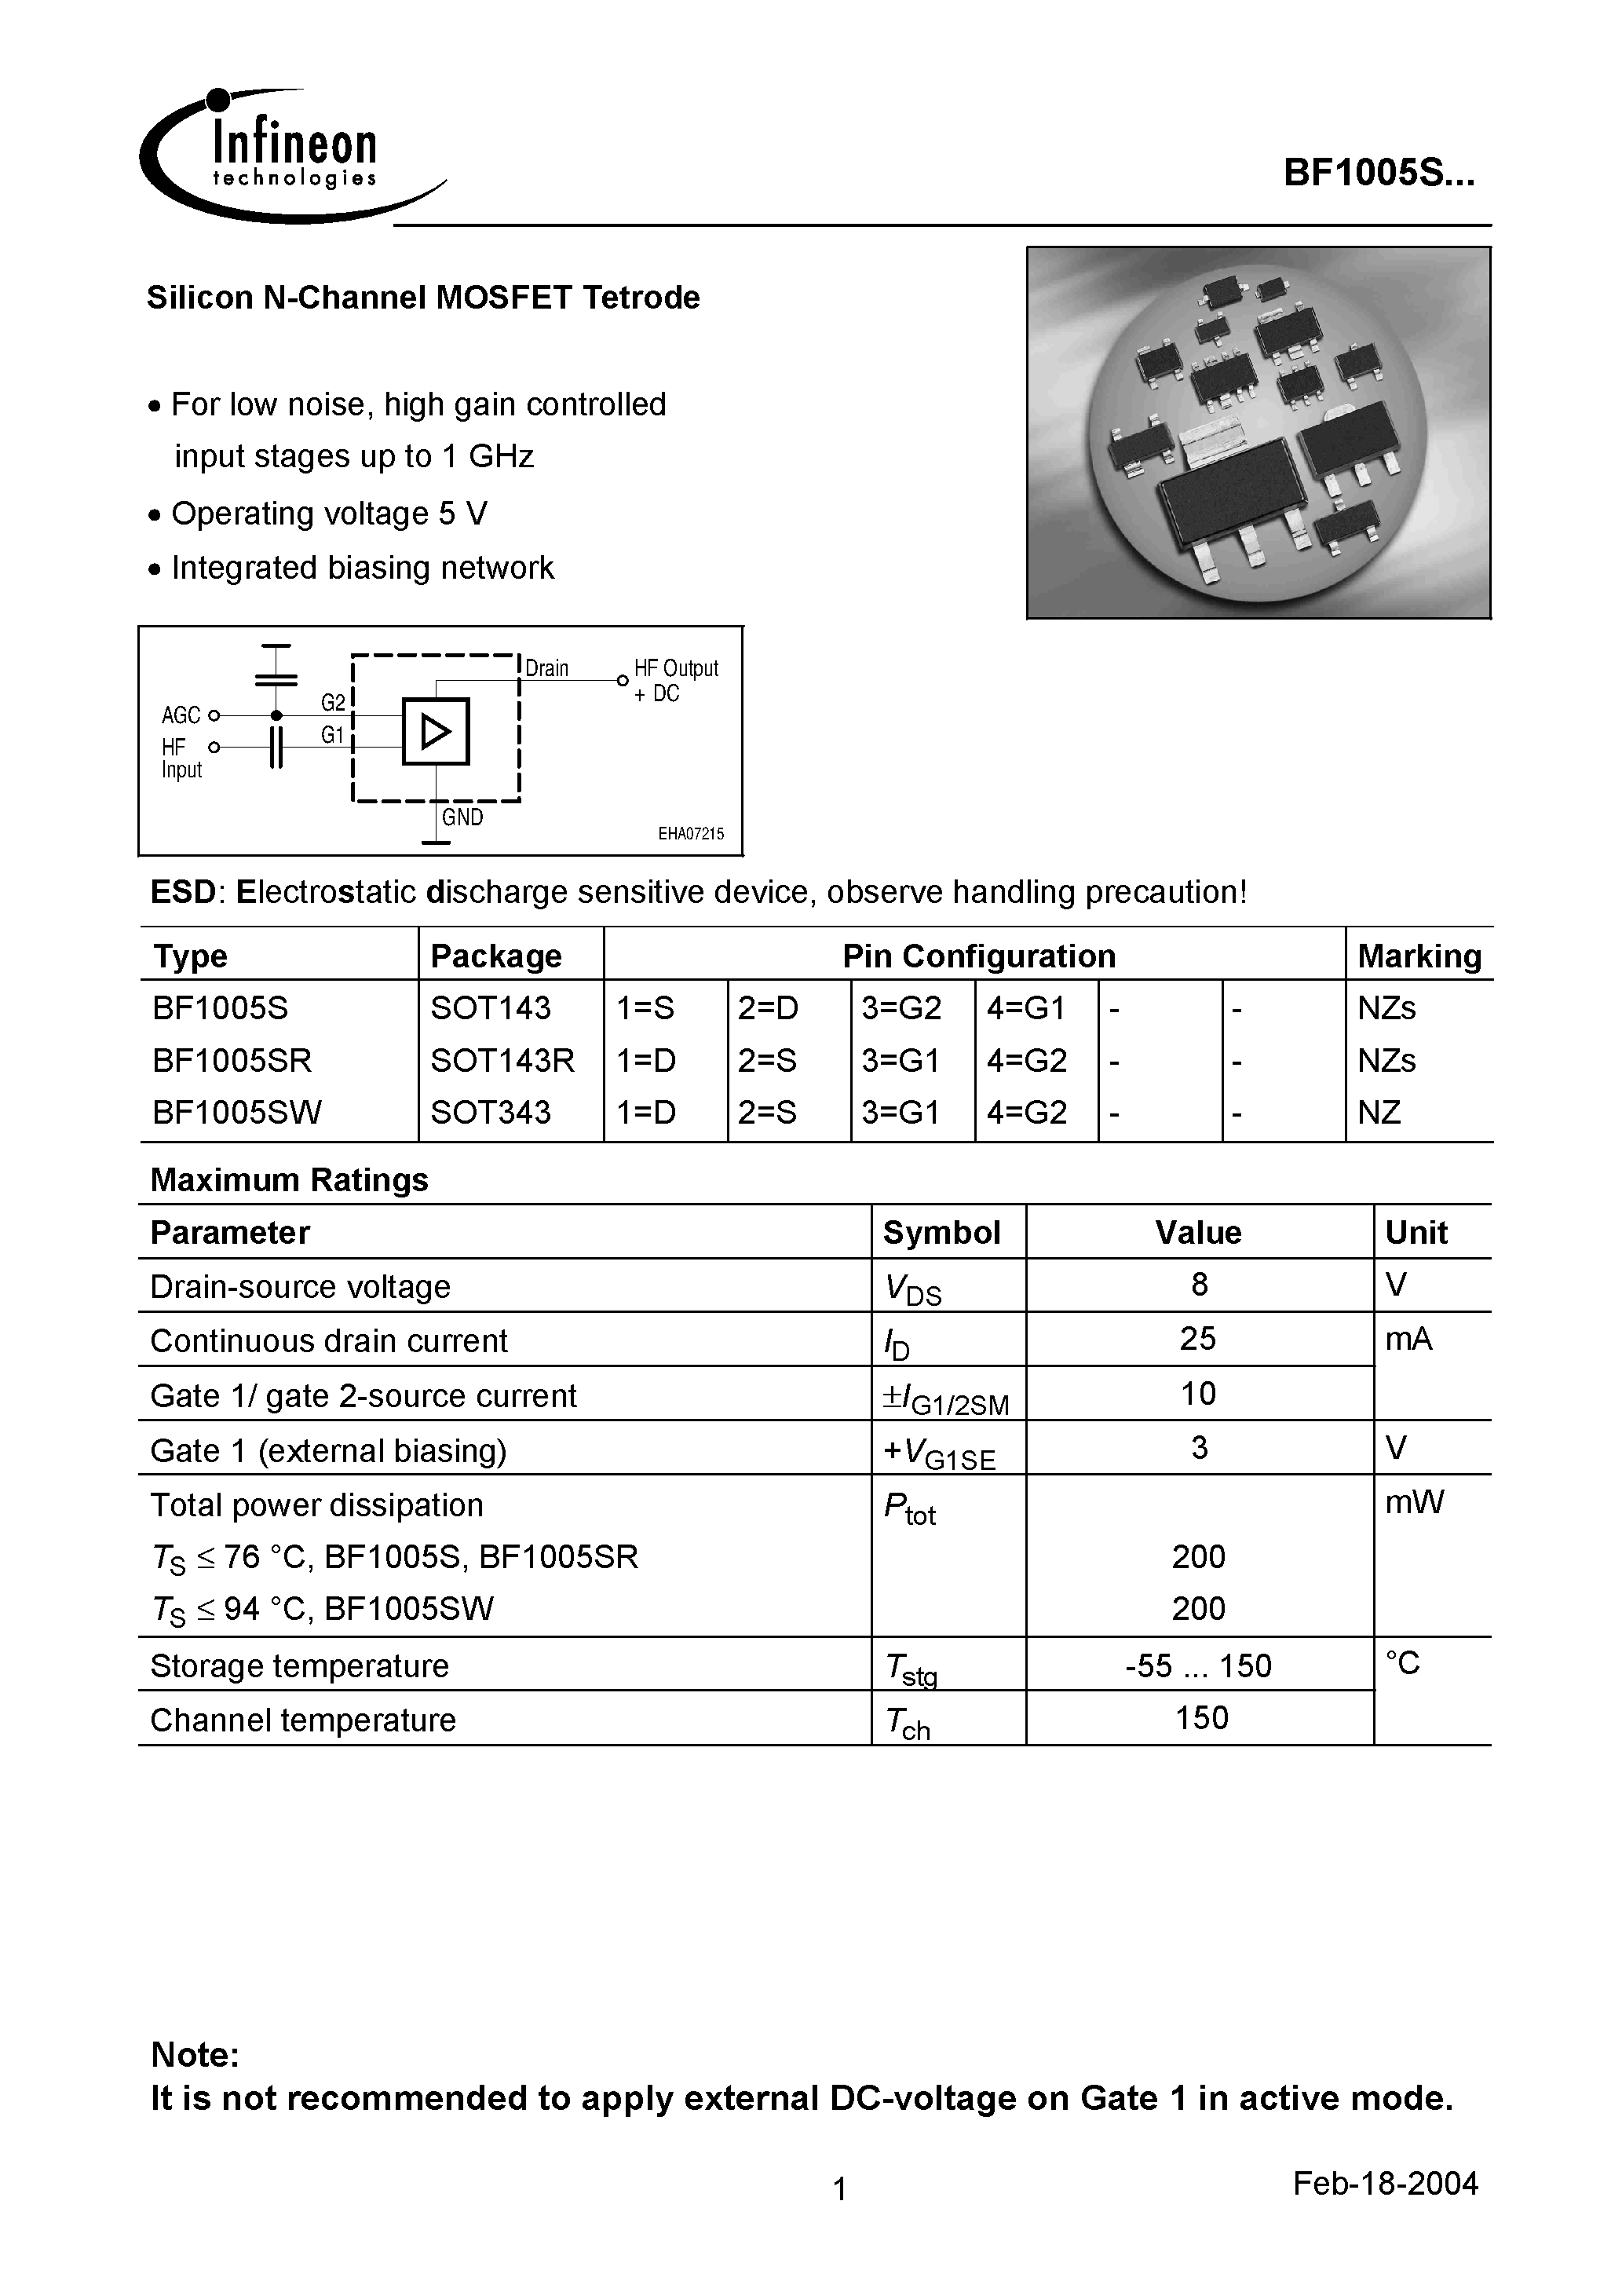 Datasheet BF1005S - Silicon N-Channel MOSFET Tetrode page 1